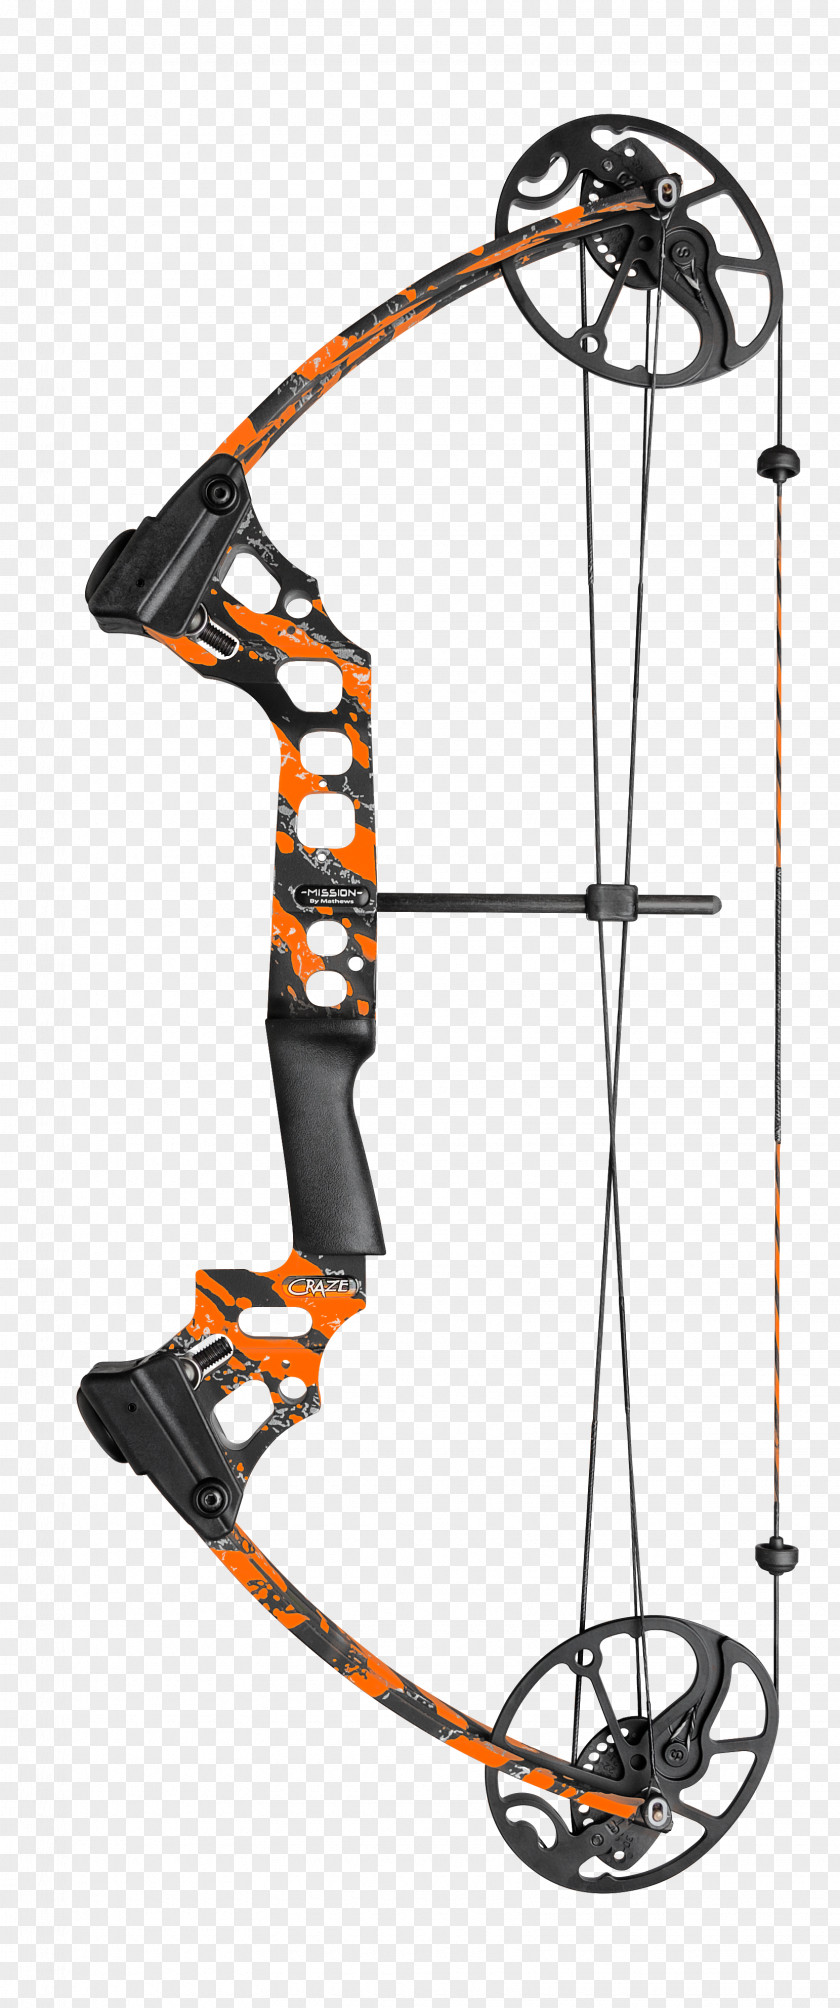 Archery Compound Bows Bow And Arrow Bowhunting PNG